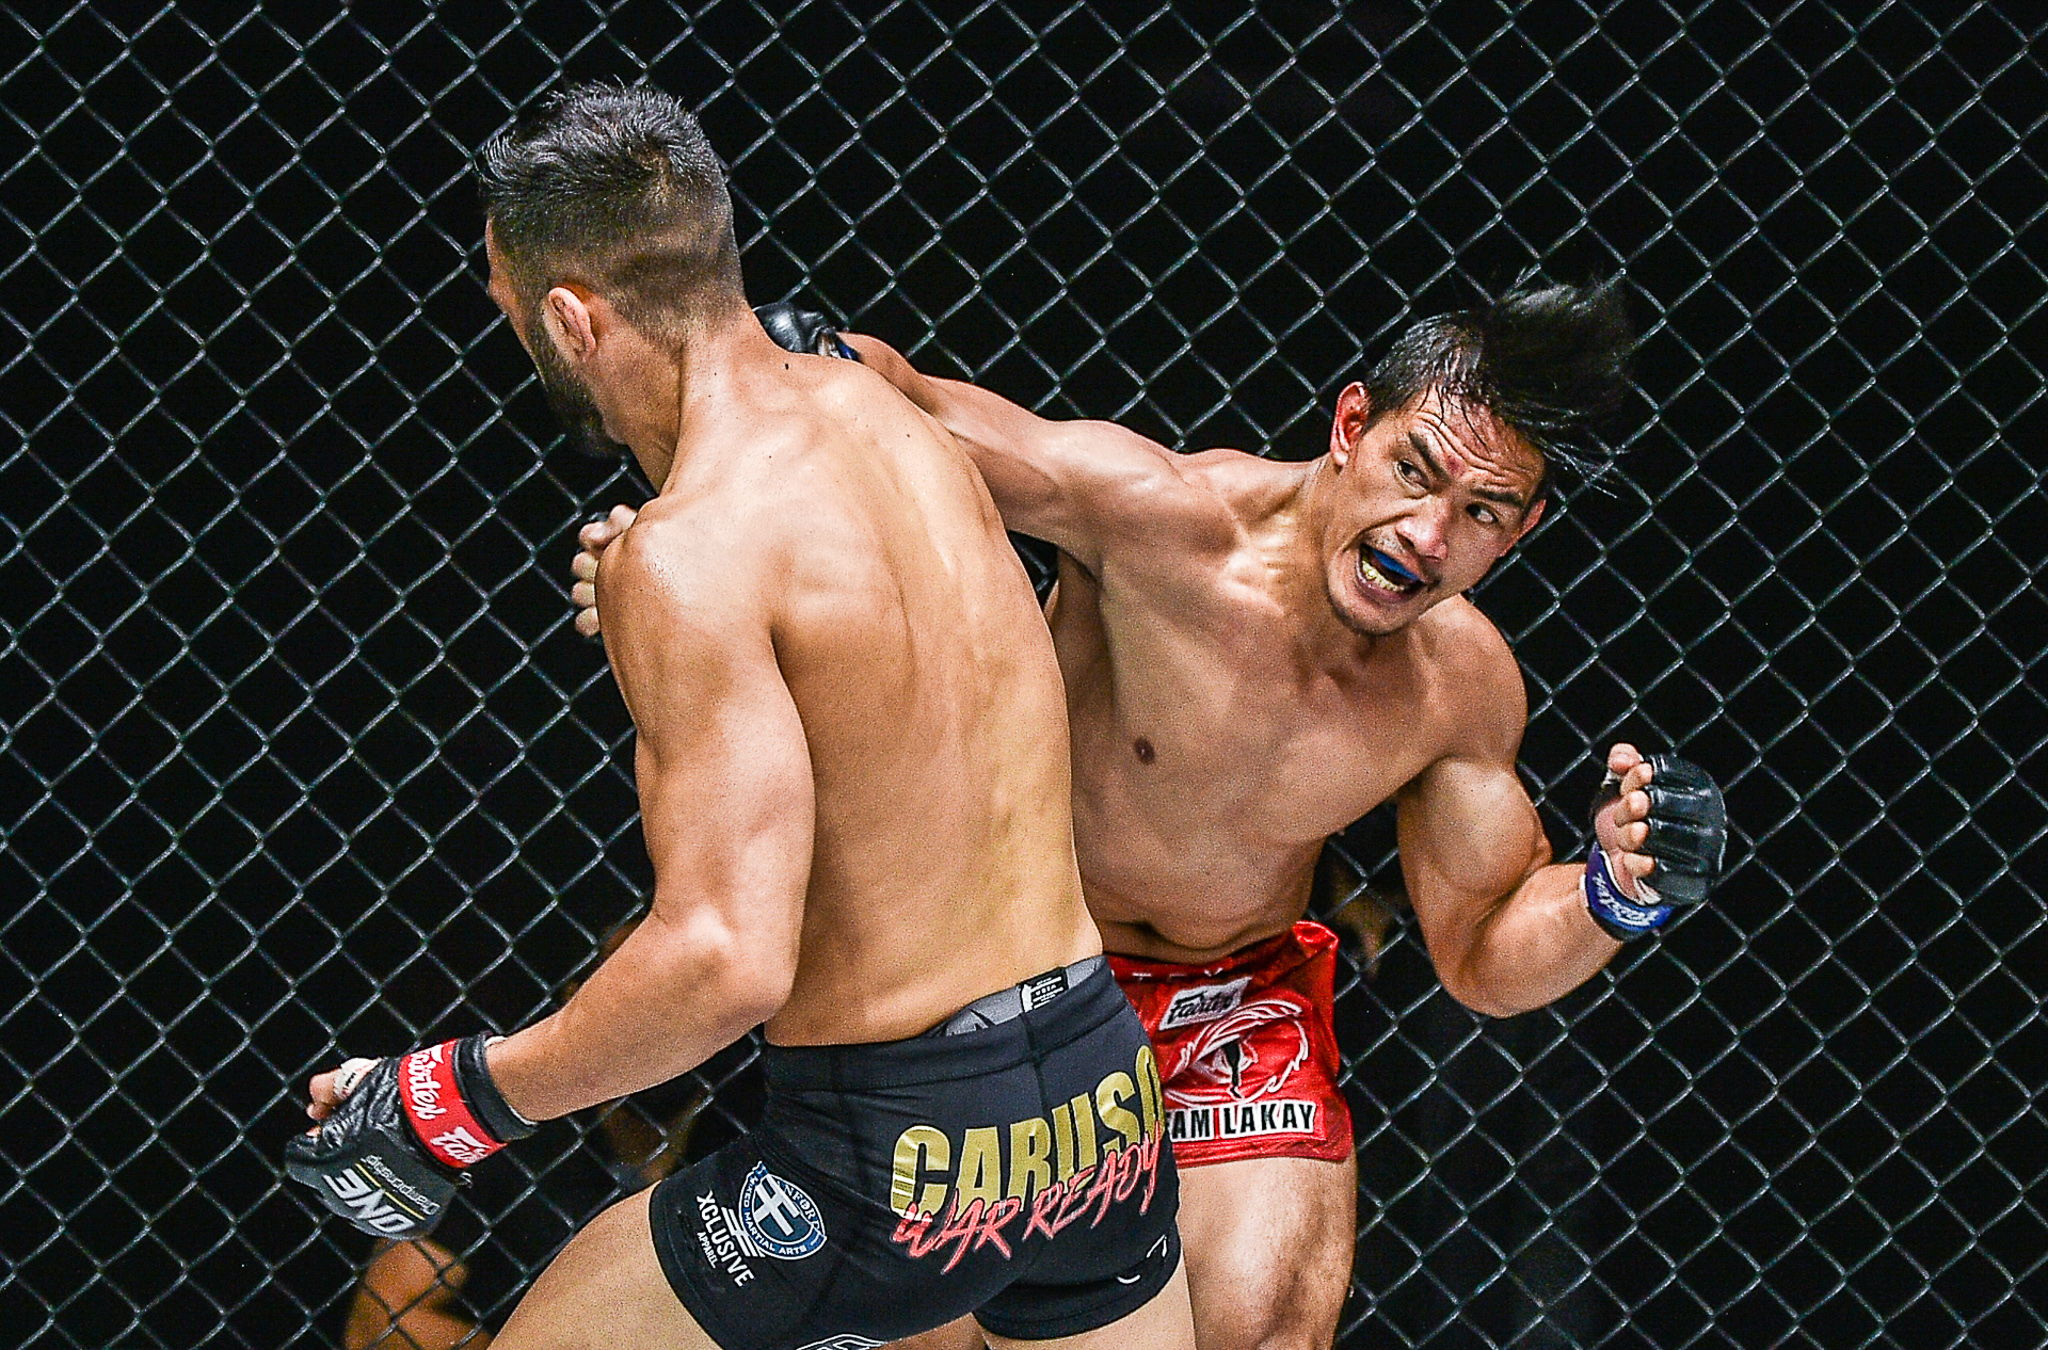 Folayang absorbs unanimous decision loss to Caruso